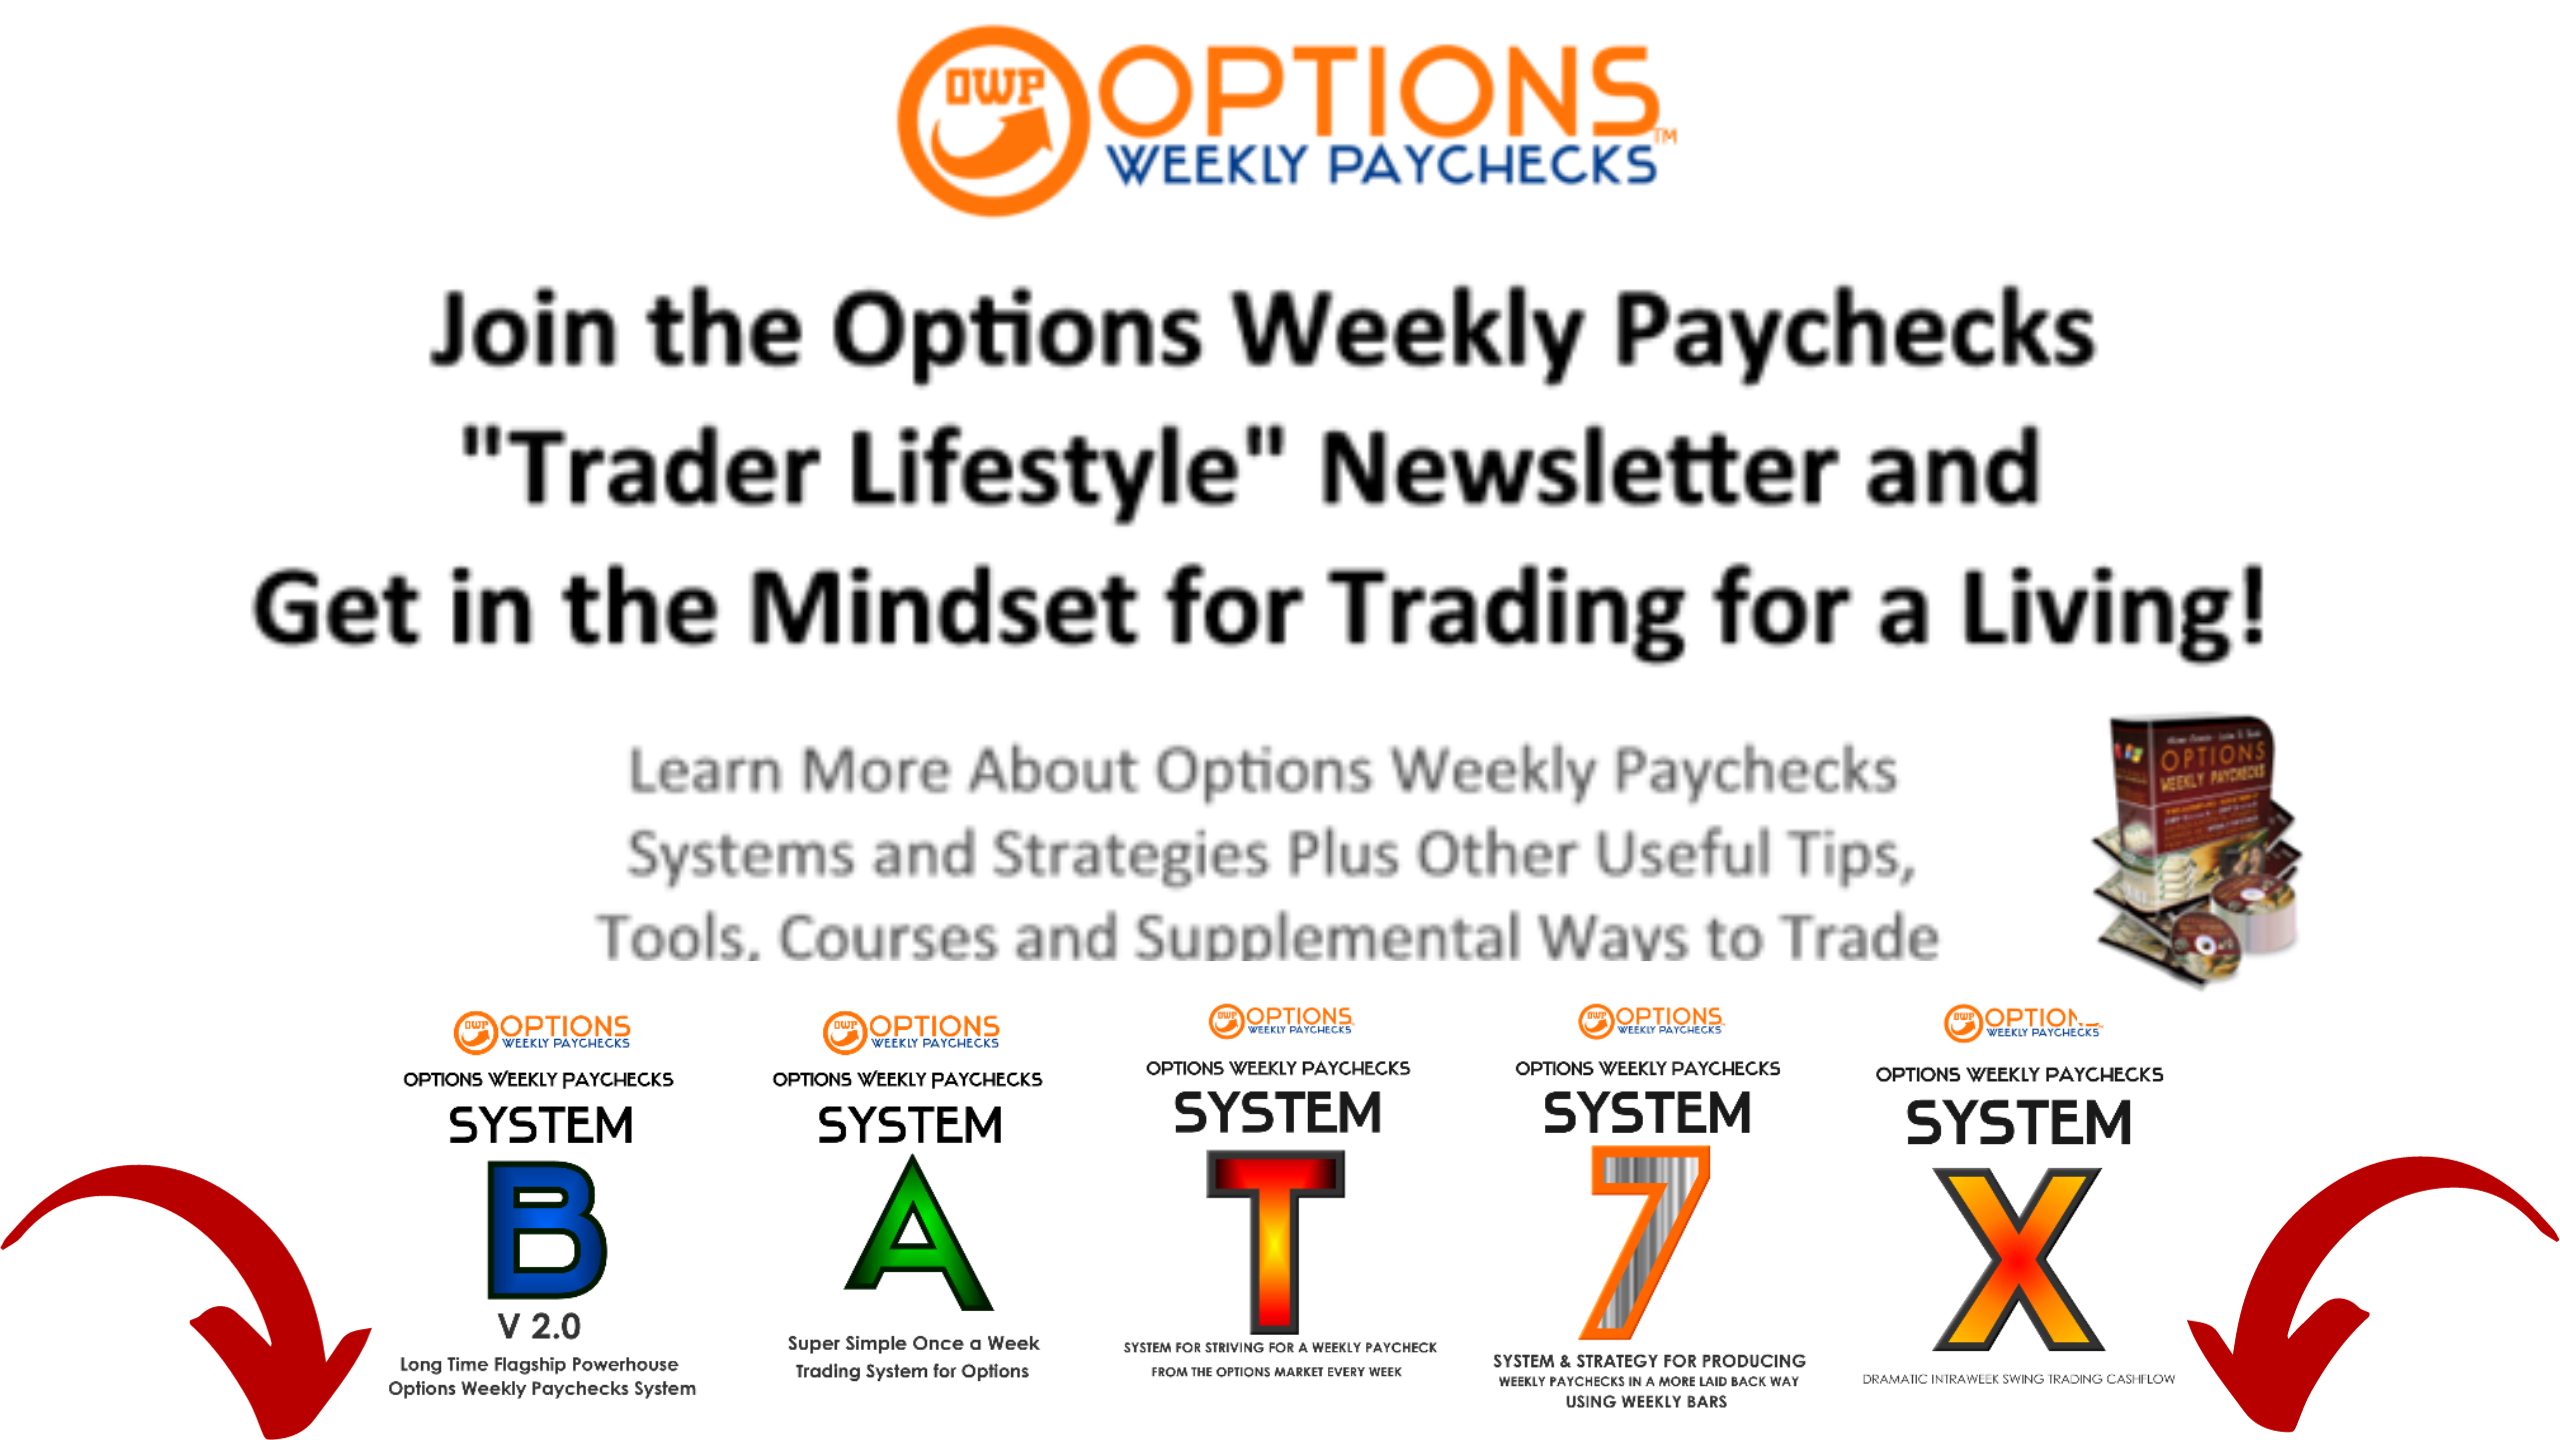 Awesome New Systems Over at Options Weekly Paychecks